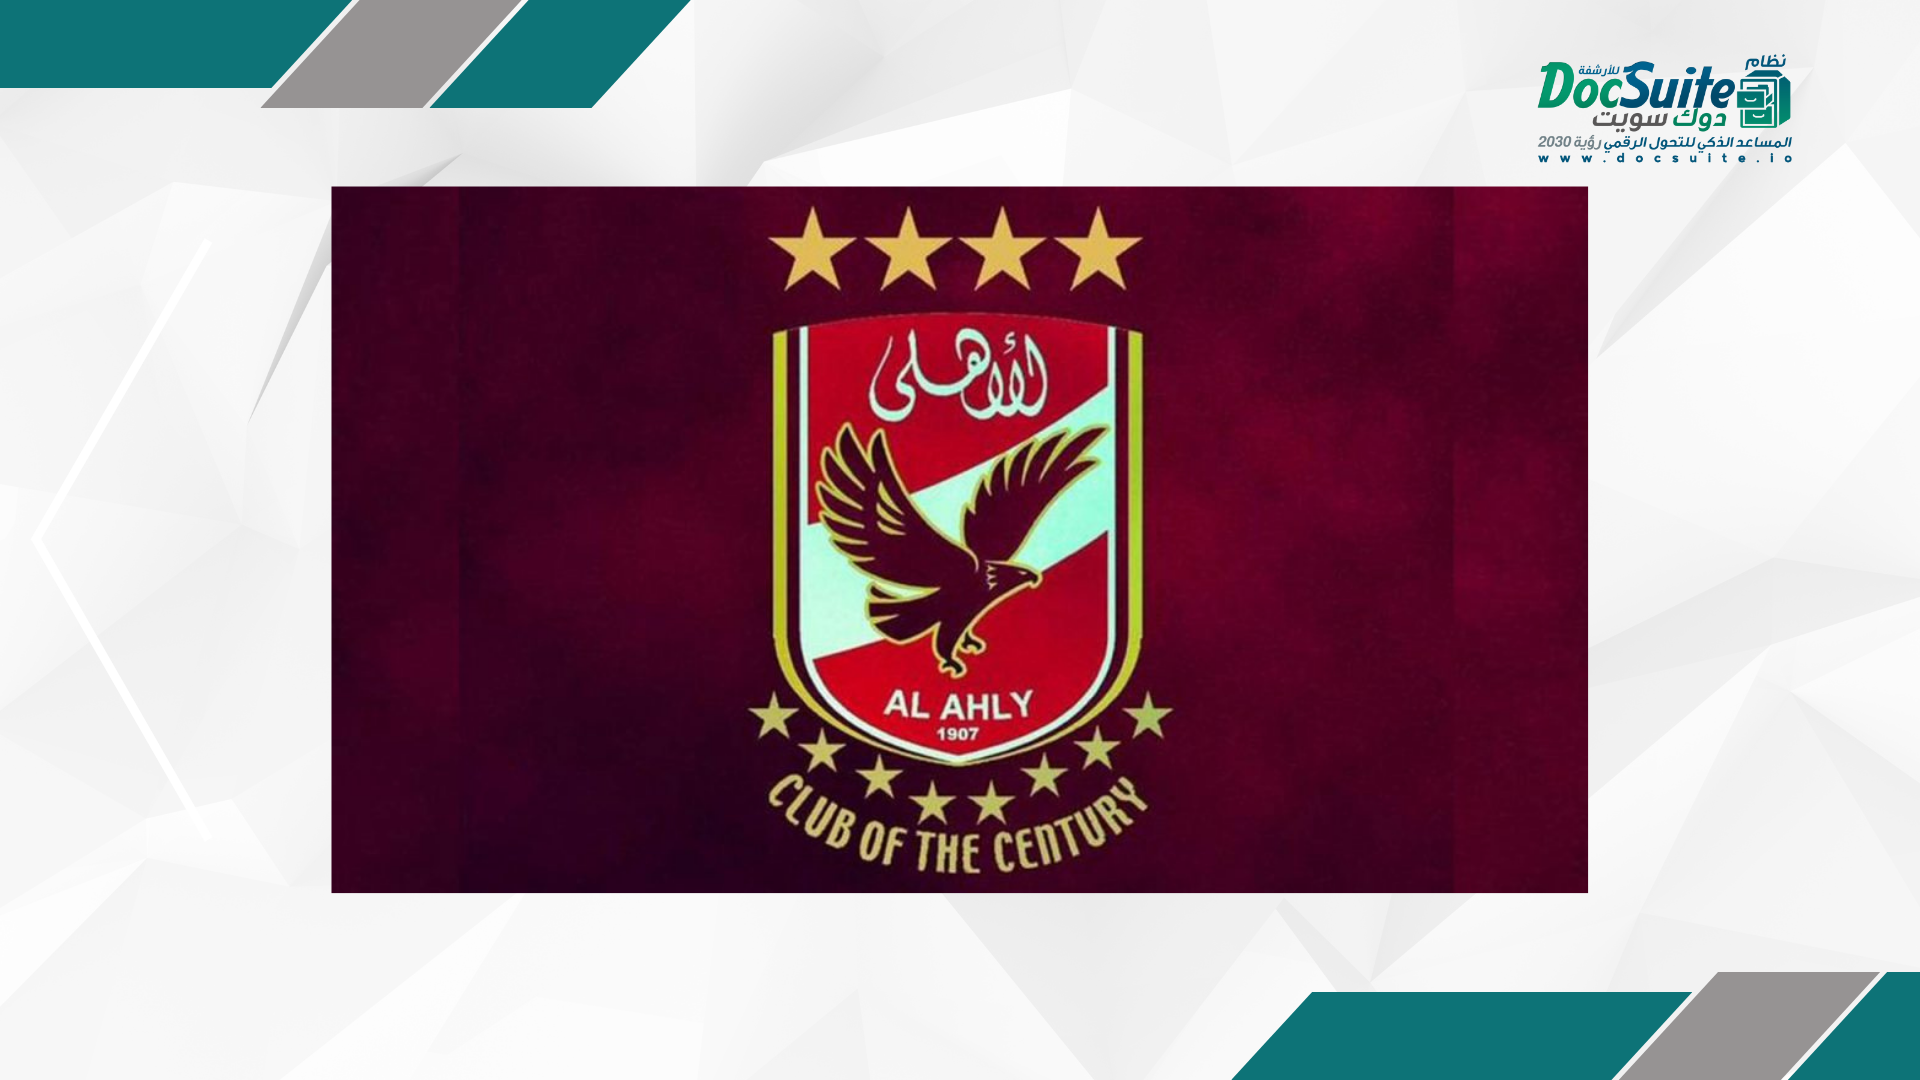 Al-Ahly Club adopts an electronic archiving system to improve its management